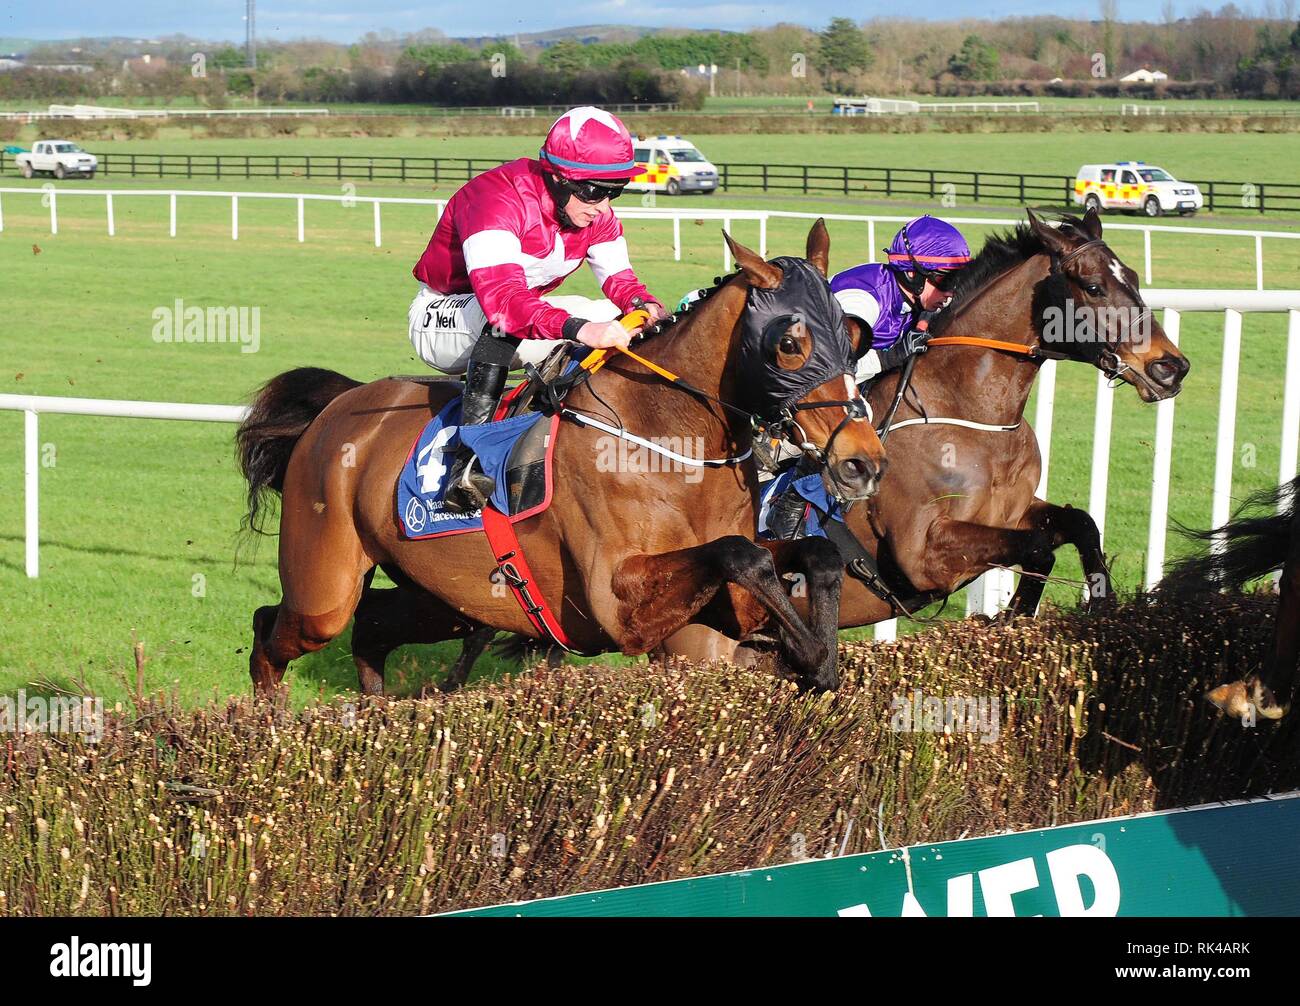 Roaring Bull and Jack Kennedy jump the last to win the O'Driscoll O'Neil Handicap Steeplechase during BBA Ireland Opera Hat Mares Chase Day at Naas Racecourse. Stock Photo